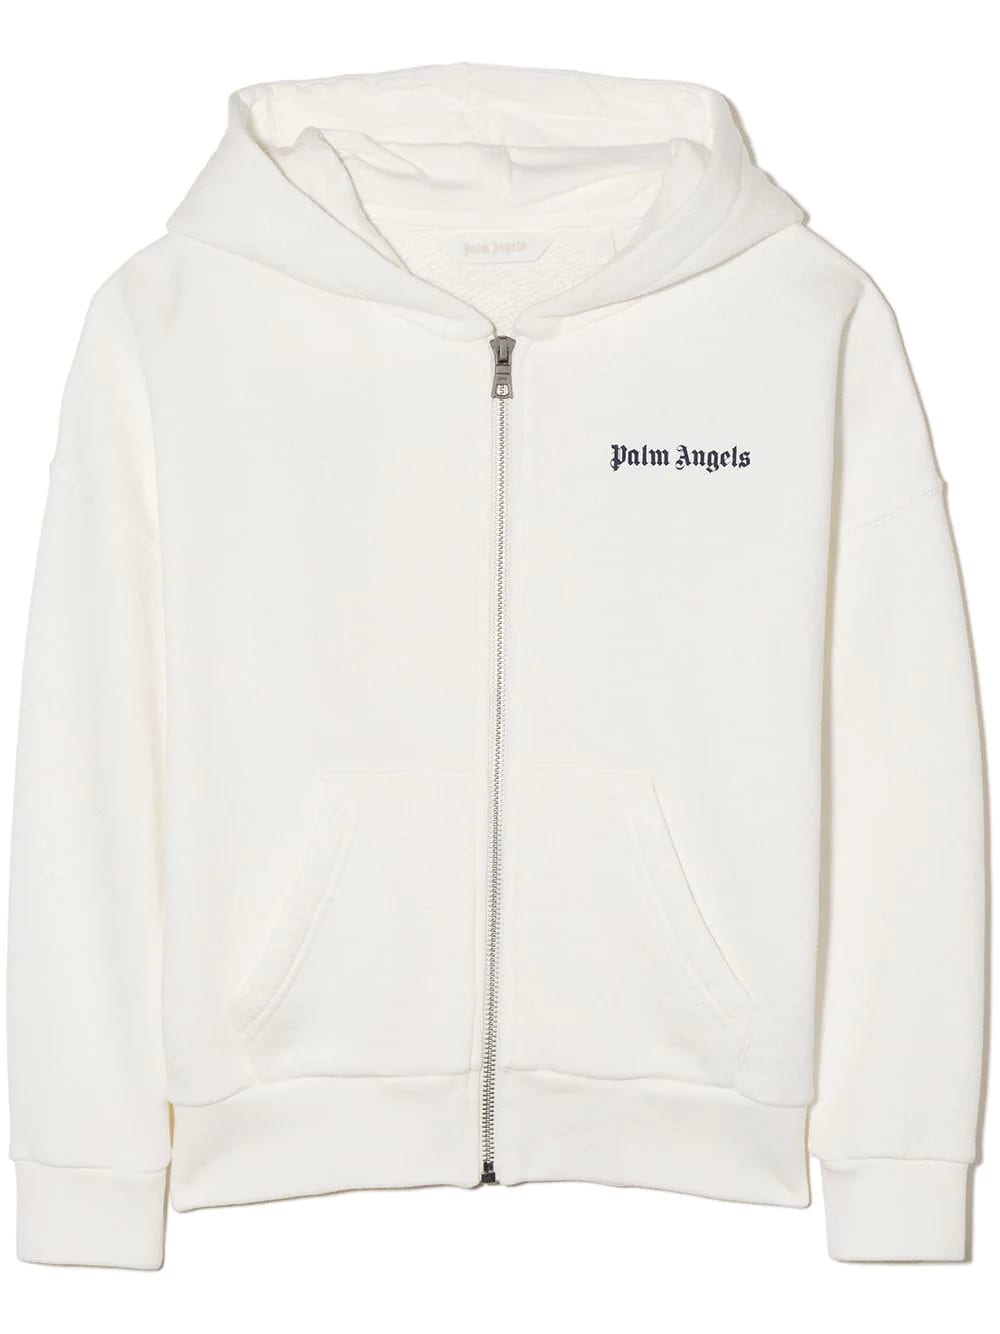 PALM ANGELS KIDS WHITE HOODIE WITH ZIP AND CONTRASTING LOGO